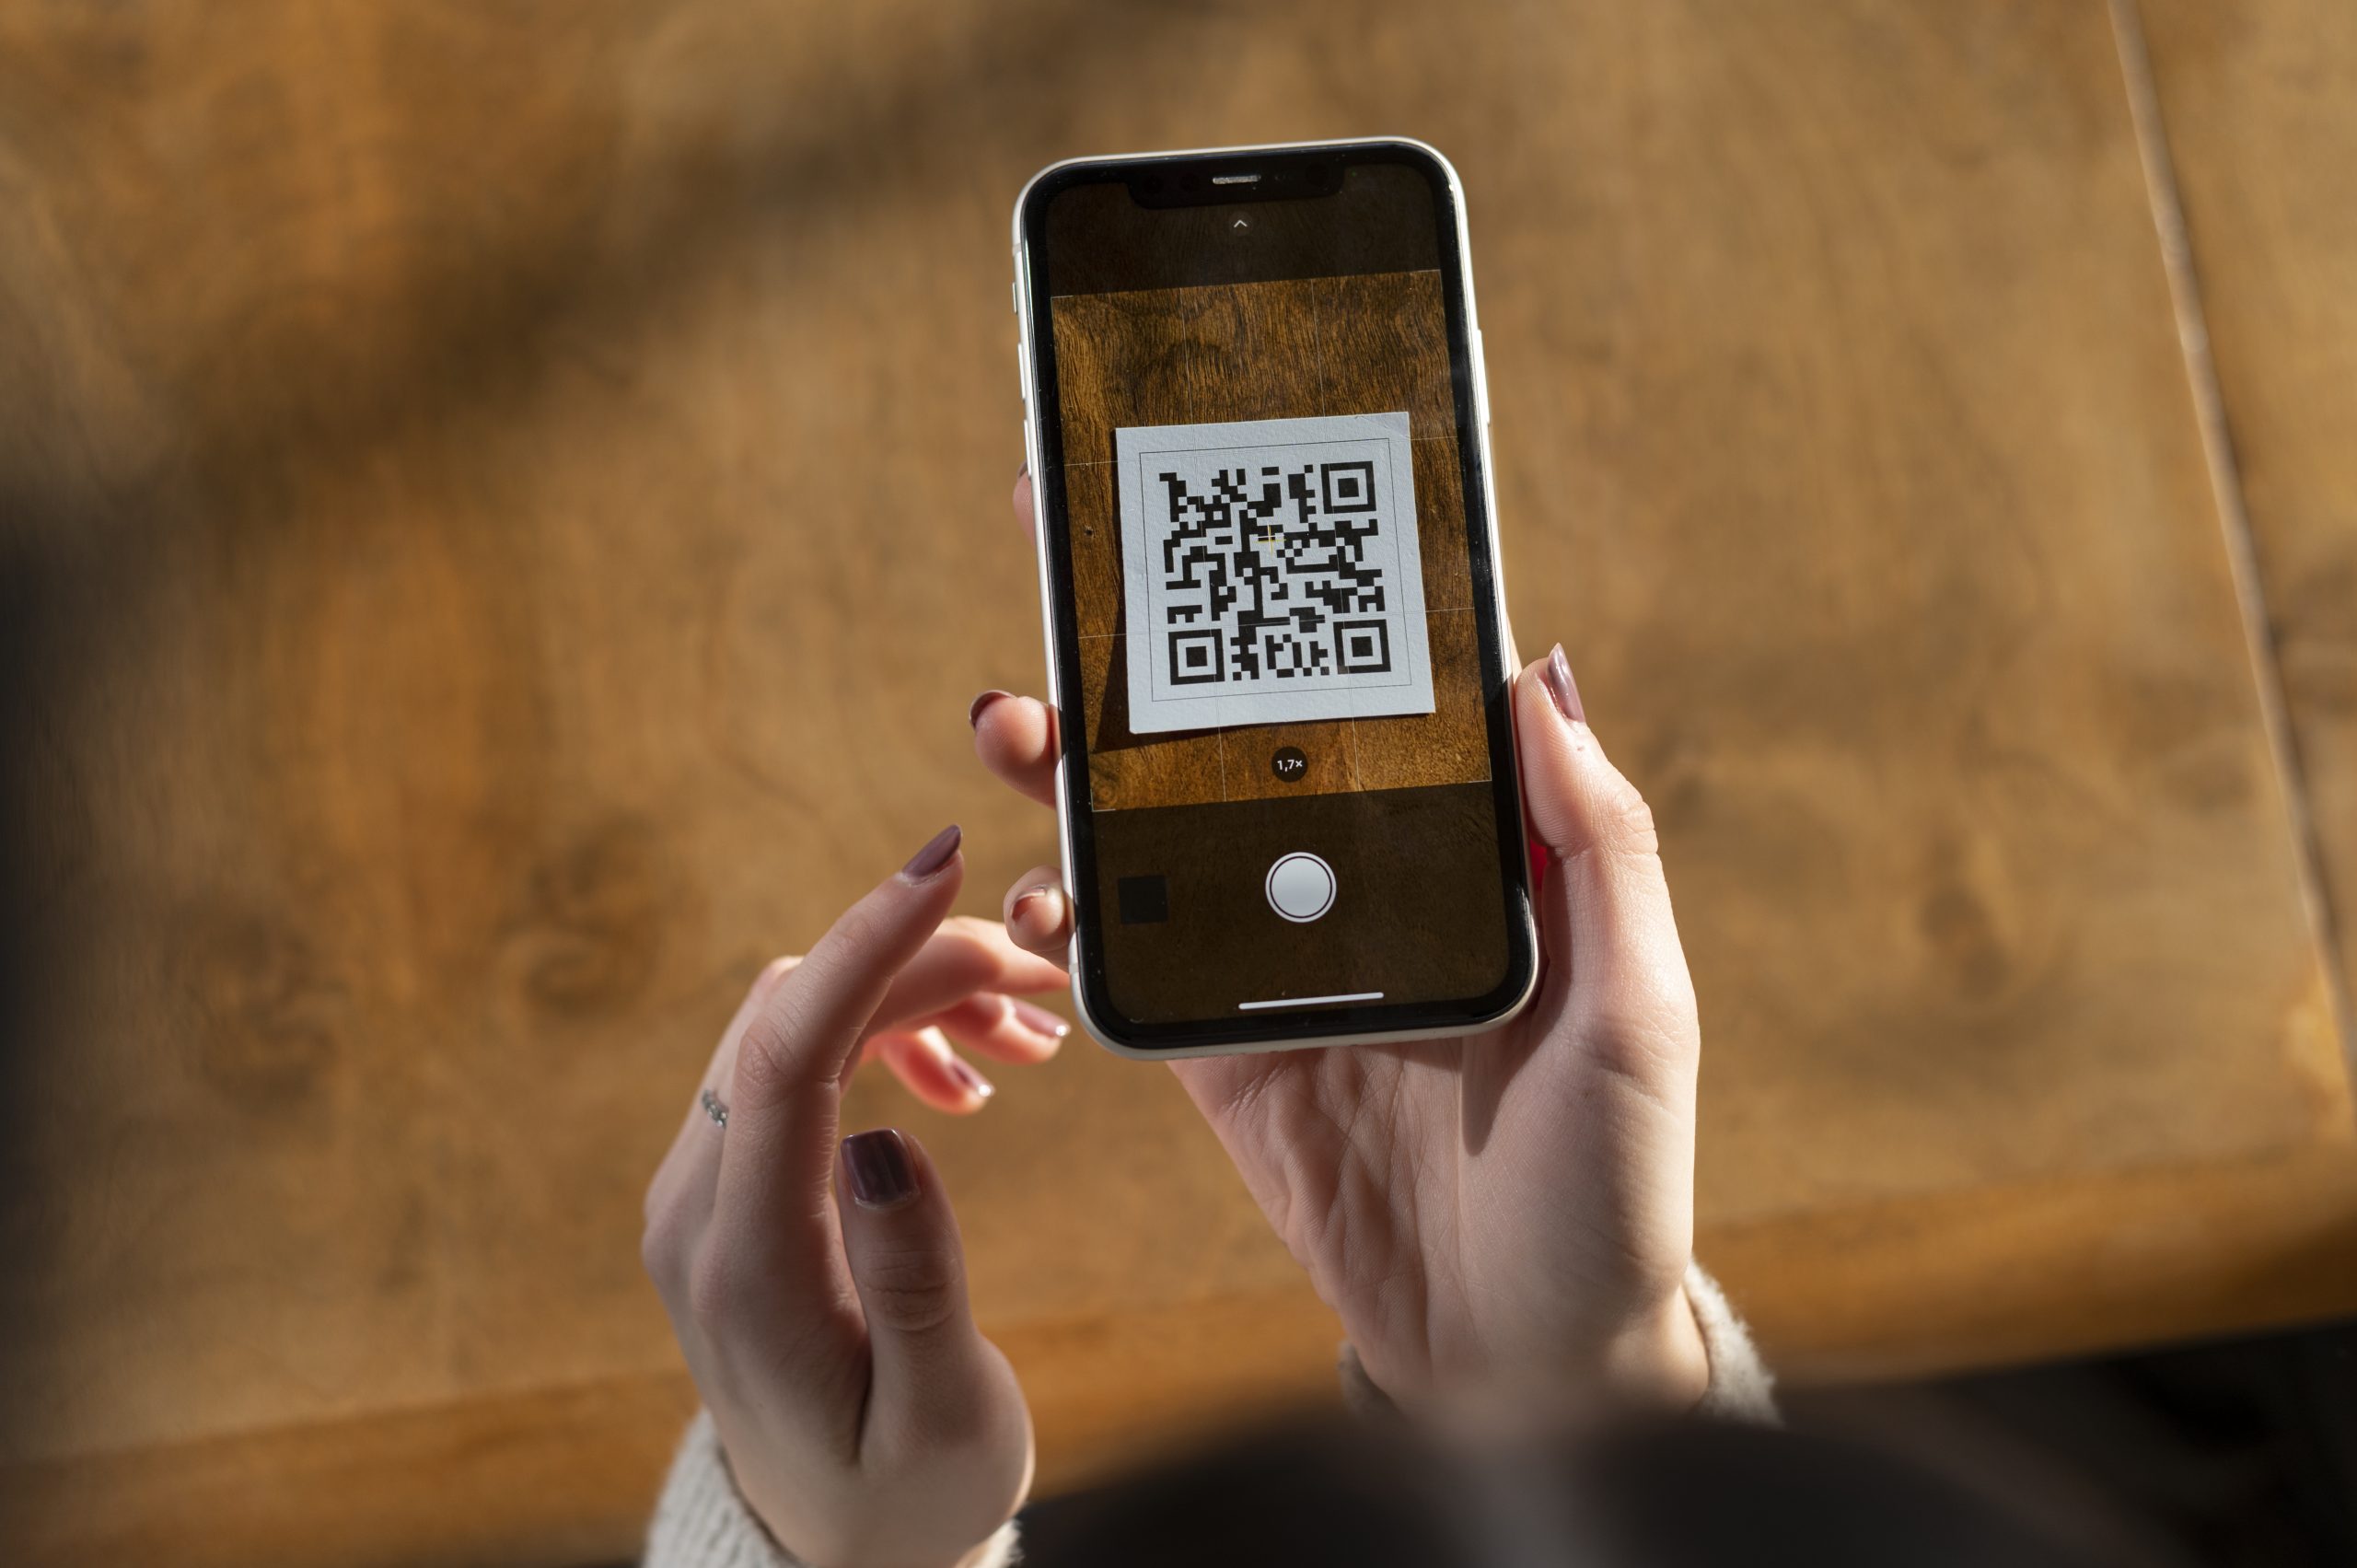 health-financing-startup-kenko-health-launches-qr-based-cashless-opd-with-kenko-pay